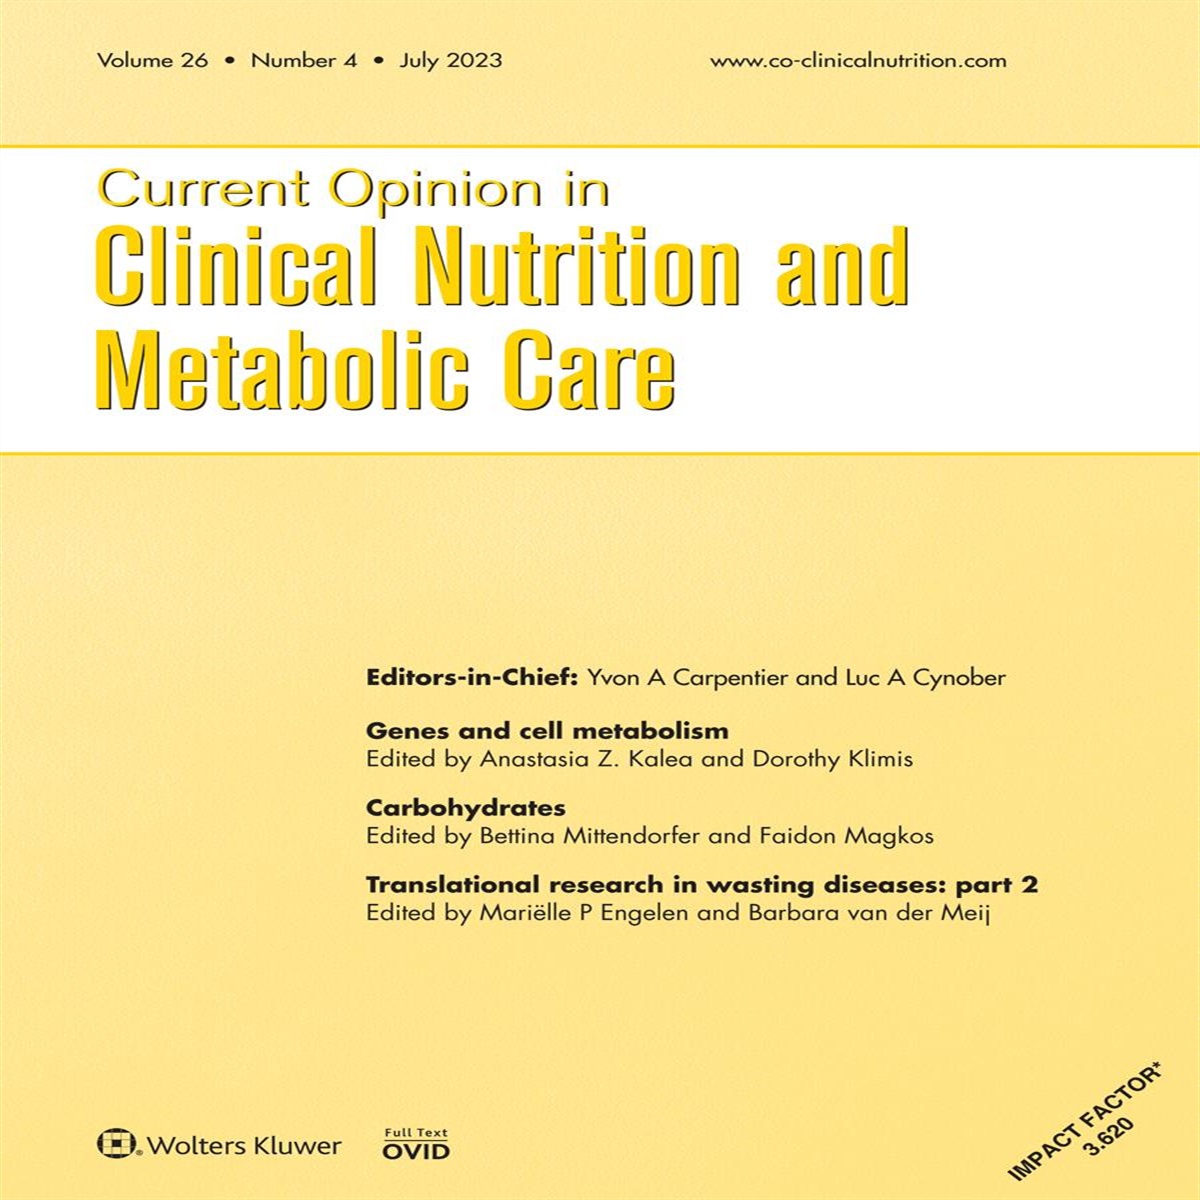 Effect of dietary carbohydrate restriction on cardiometabolic function in type 2 diabetes: weight loss and beyond